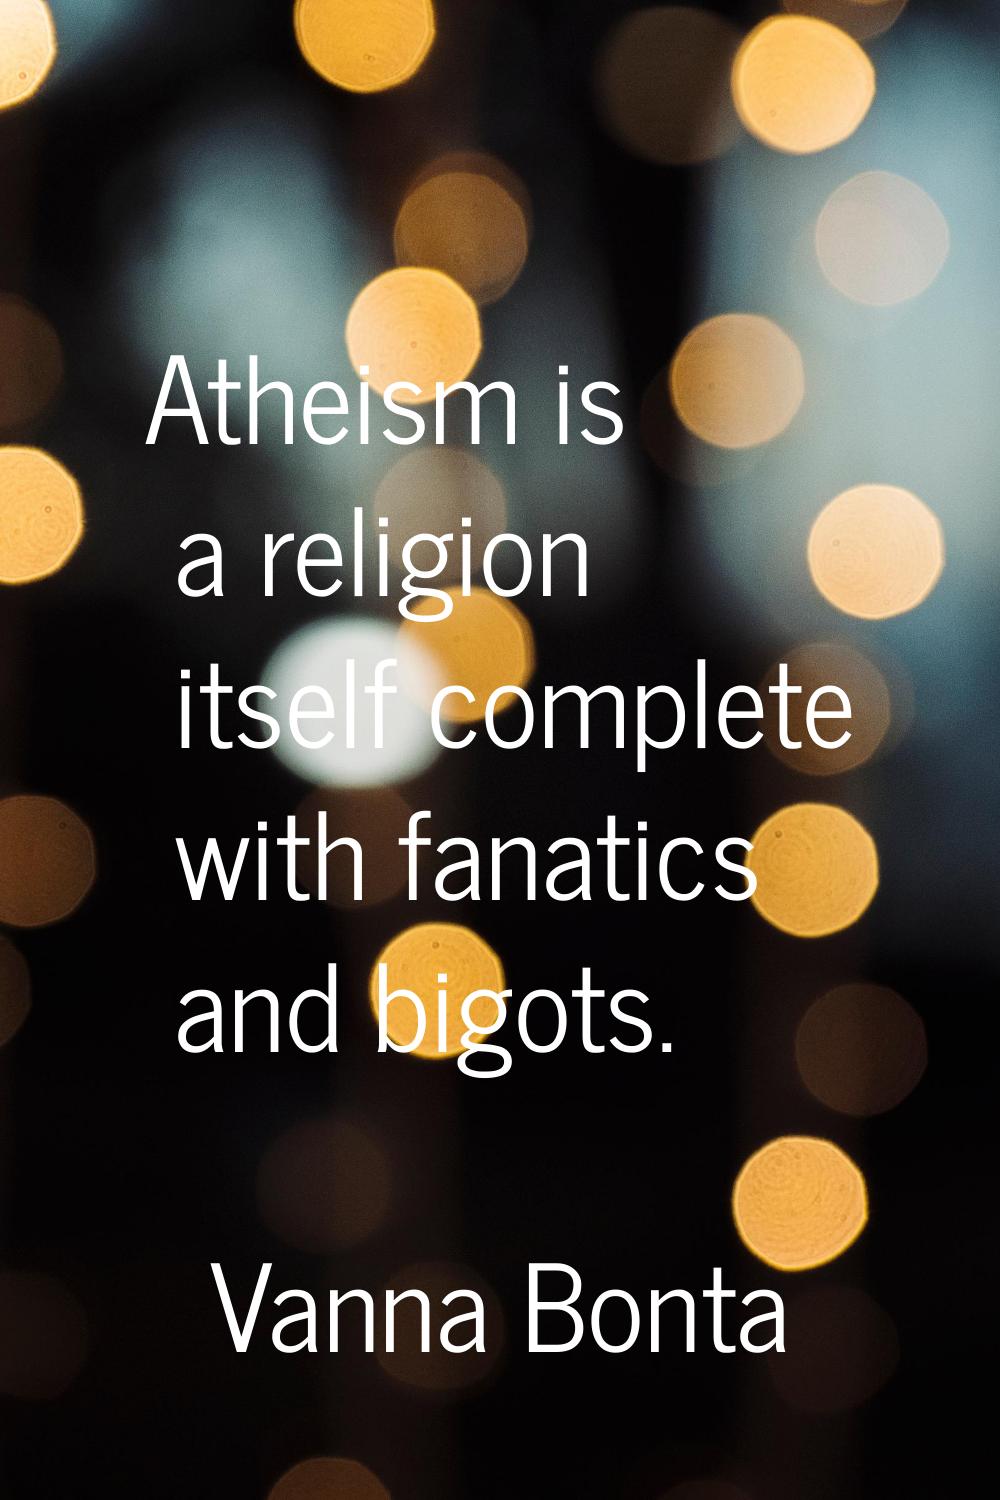 Atheism is a religion itself complete with fanatics and bigots.